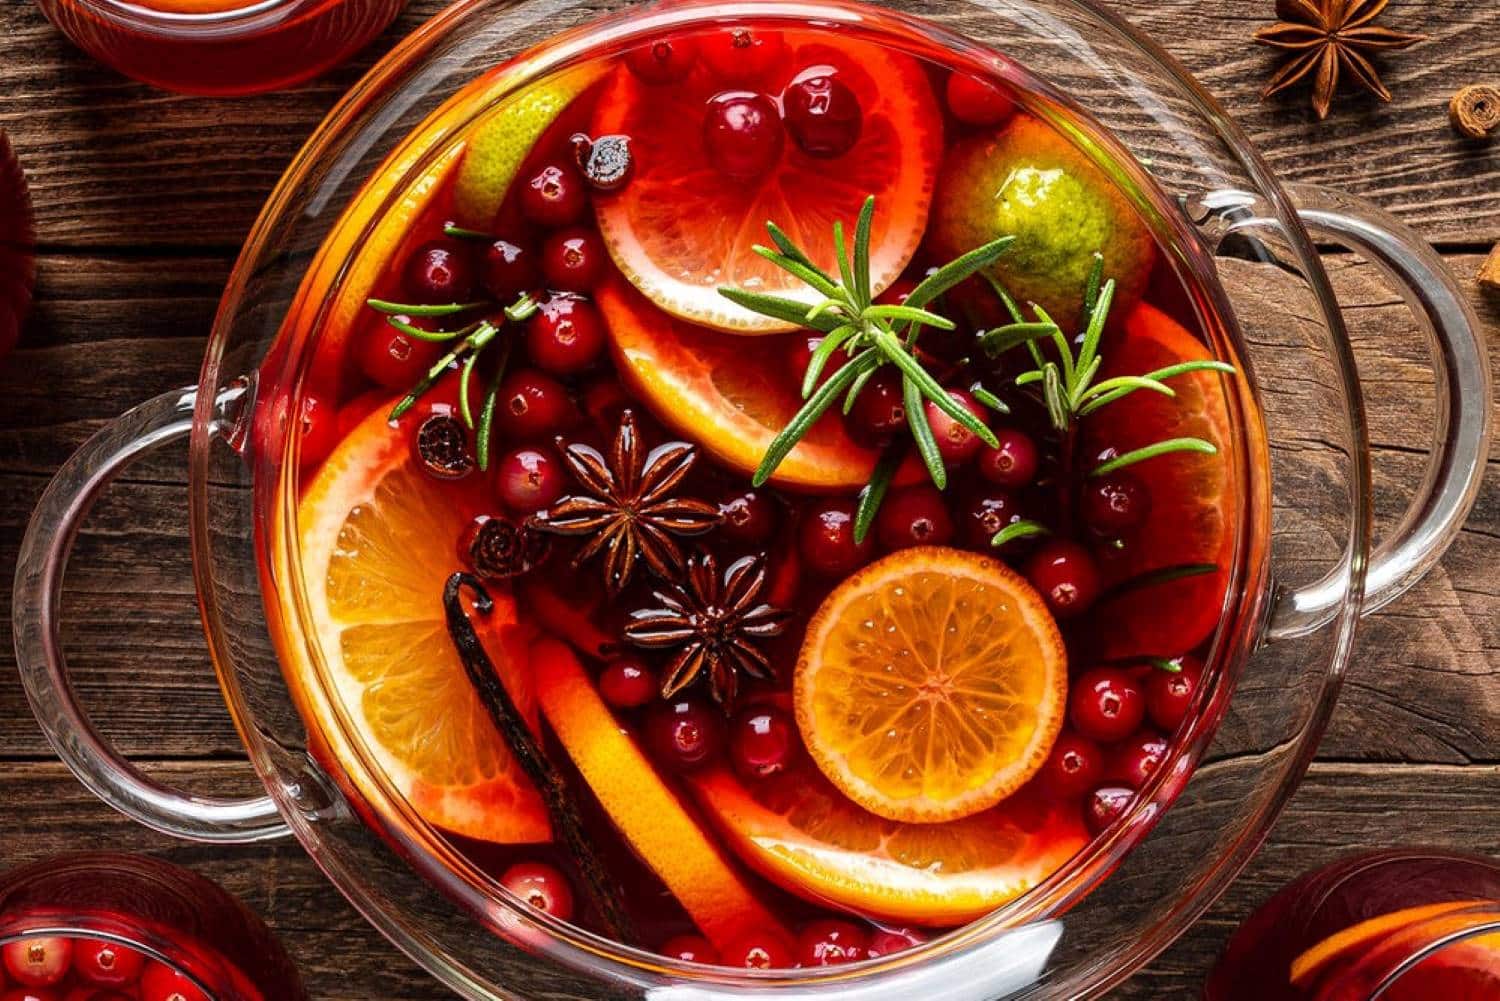 Get the Harvest Punch recipe